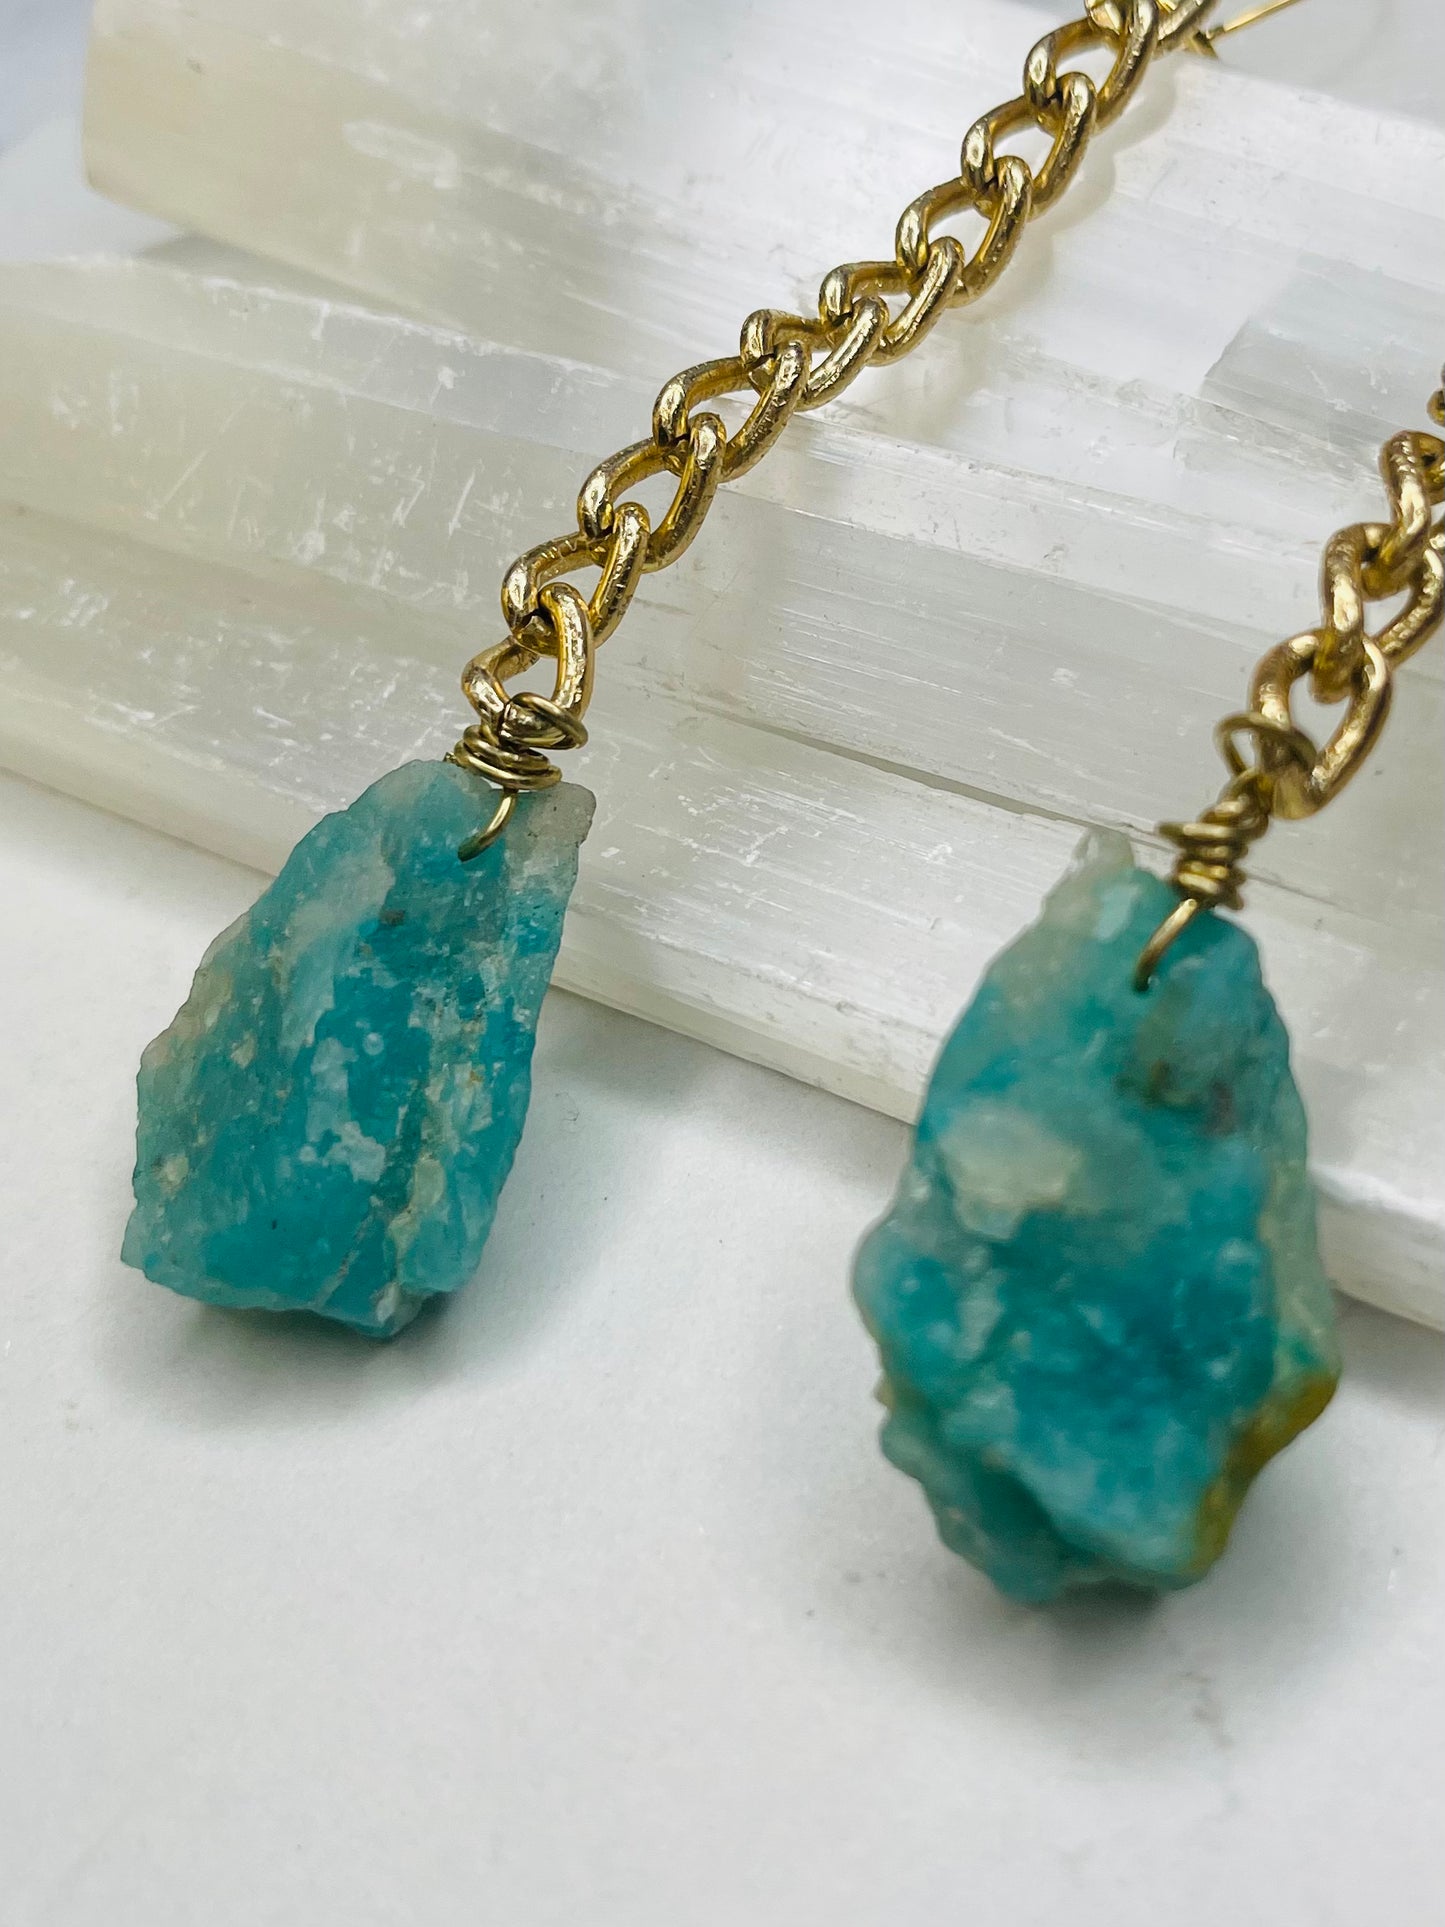 Chakra Soul Chains Earrings w Amazonite Crystals